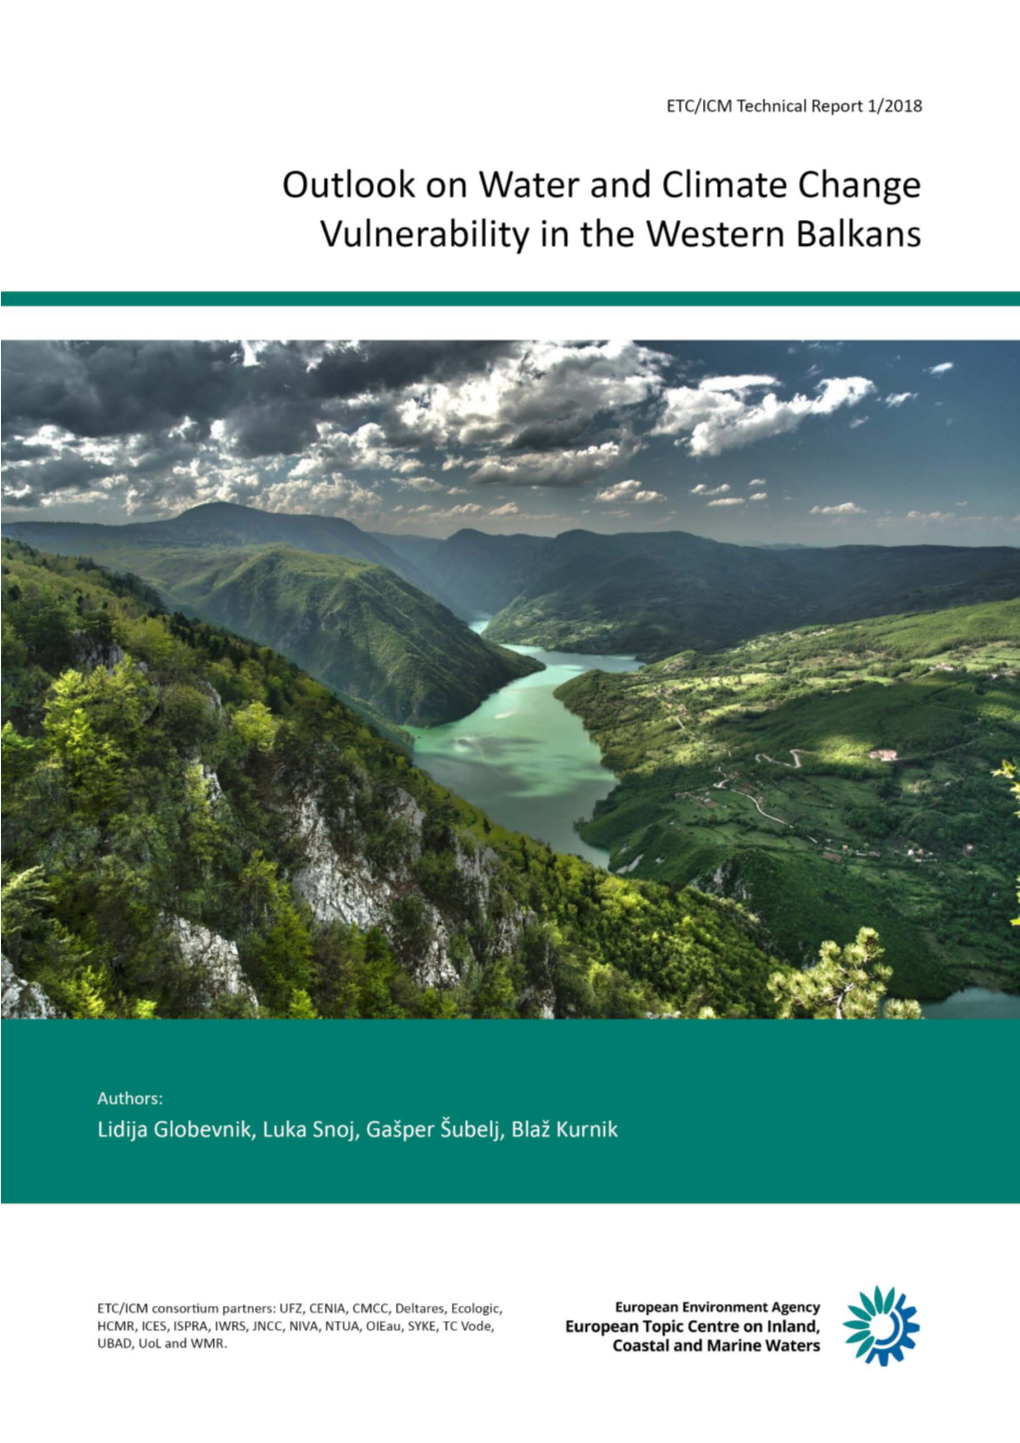 Outlook on Water and Climate Change Vulnerability in The